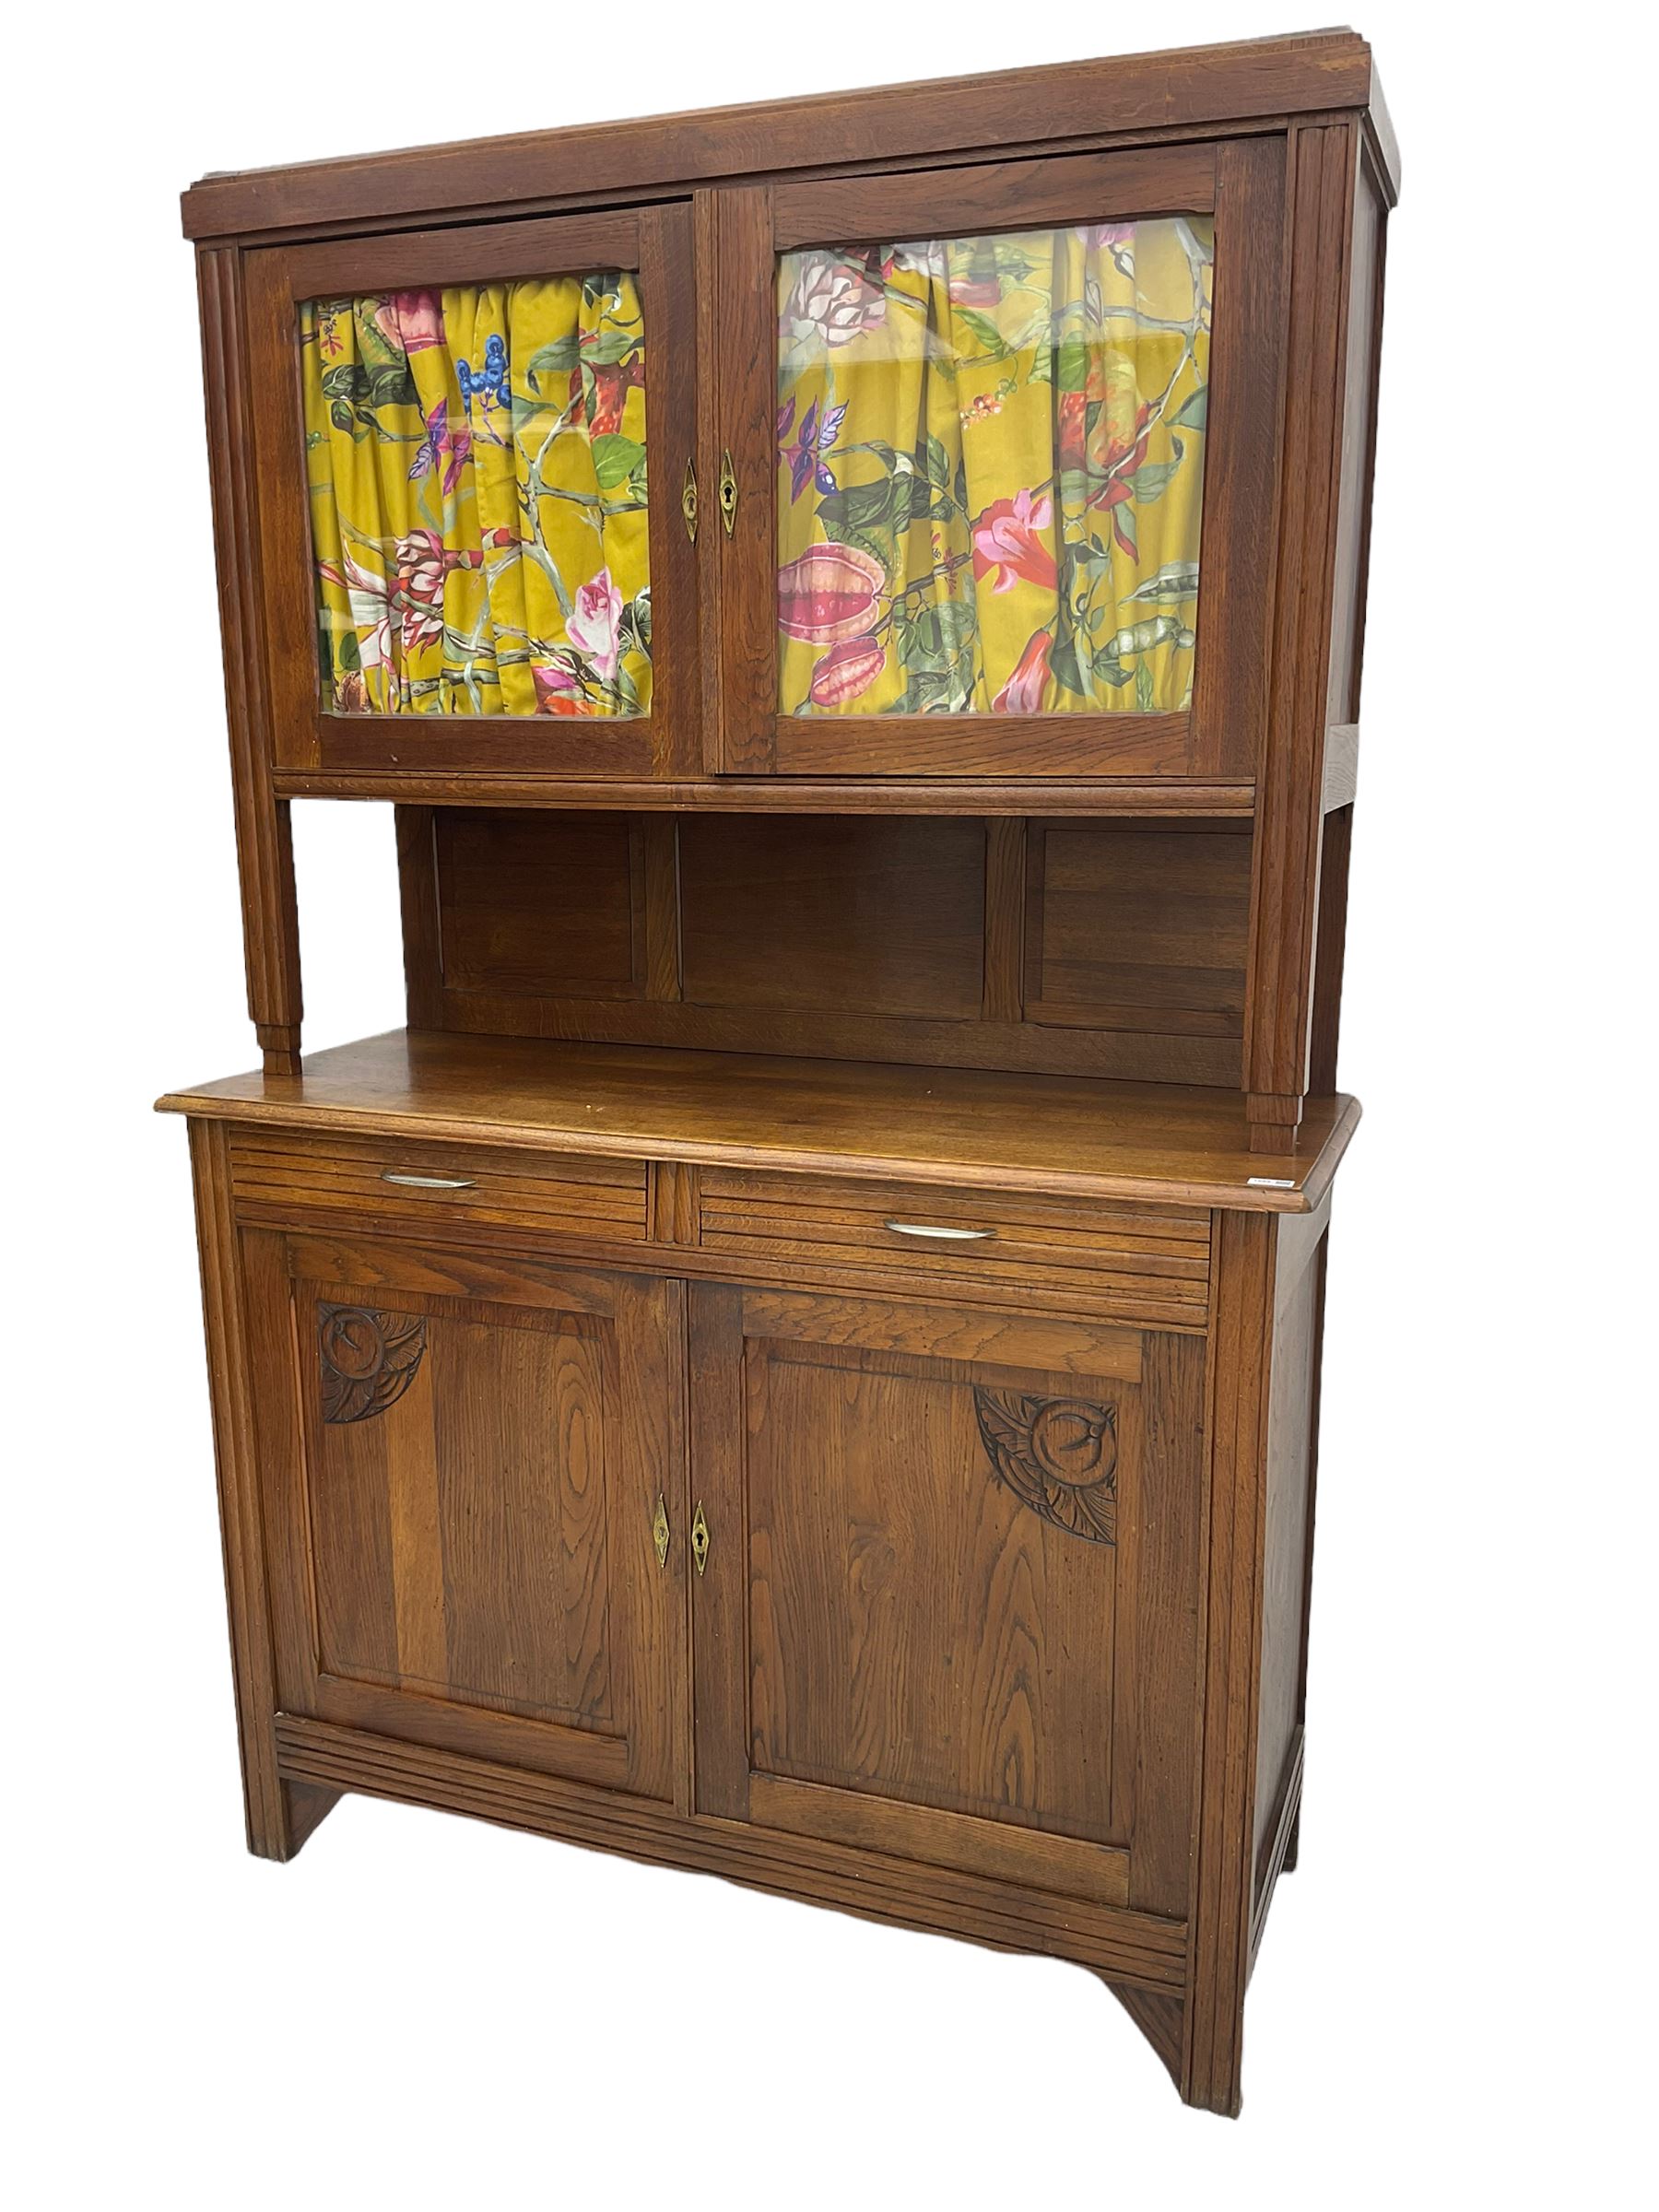 Early to mid-20th century oak dresser - Image 3 of 8